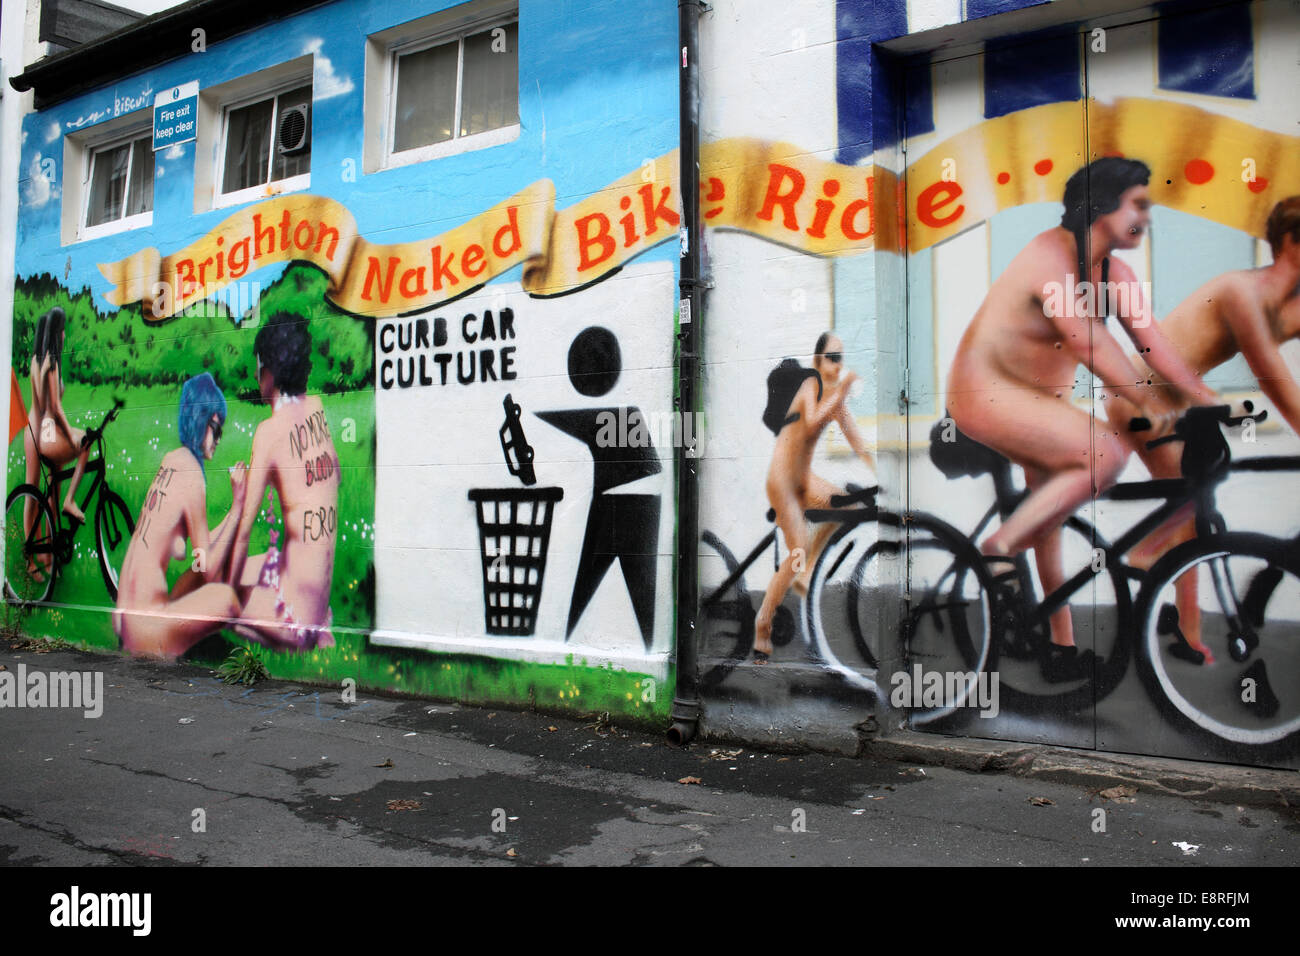 Part of a mural depicting the annual Brighton Naked Bike Ride, including the slogan “CURB CAR CULTURE”, Brighton. Stock Photo